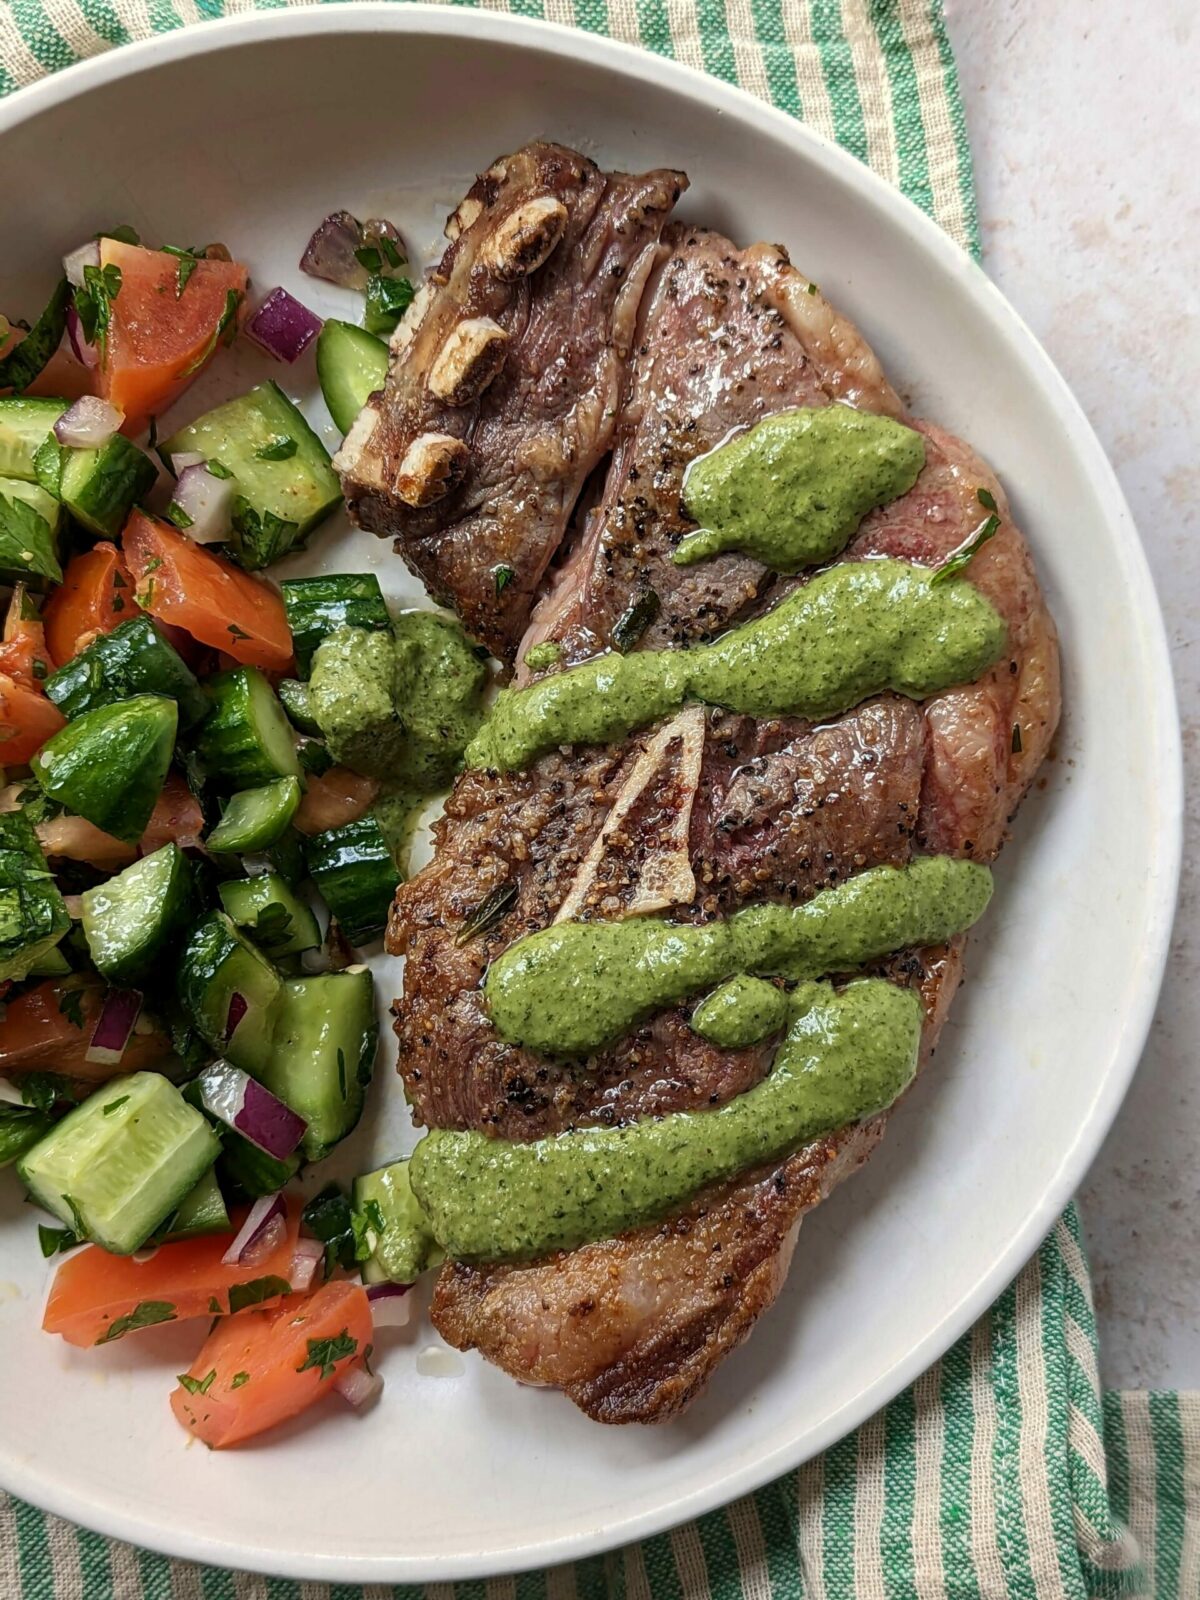 Lamb shoulder chop served with cucumber and tomato salad and topped with mint chutney.